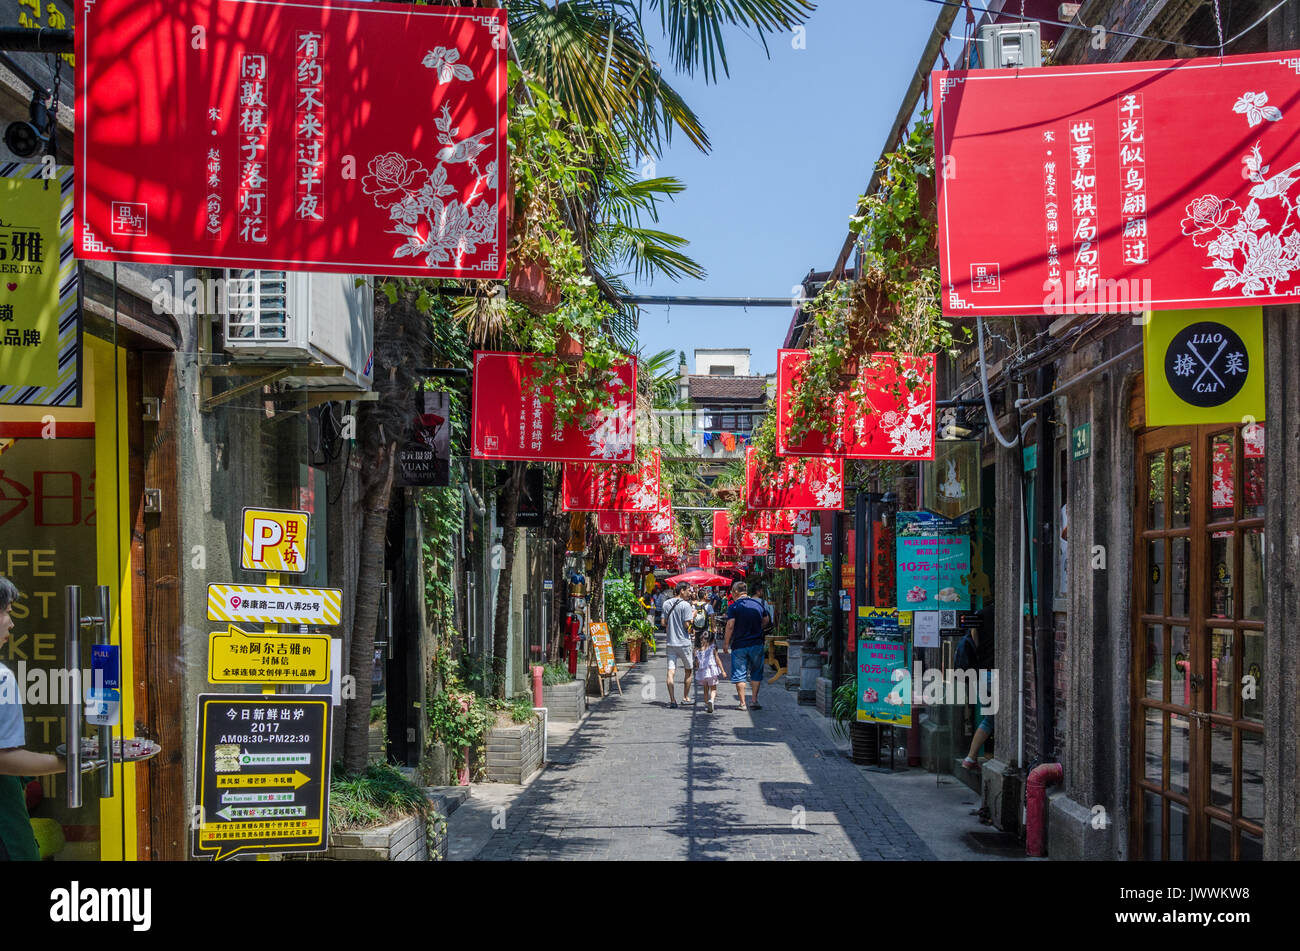 Red banners line the sides of an alleyway through Tianzifang in Shanghai, China. Stock Photo